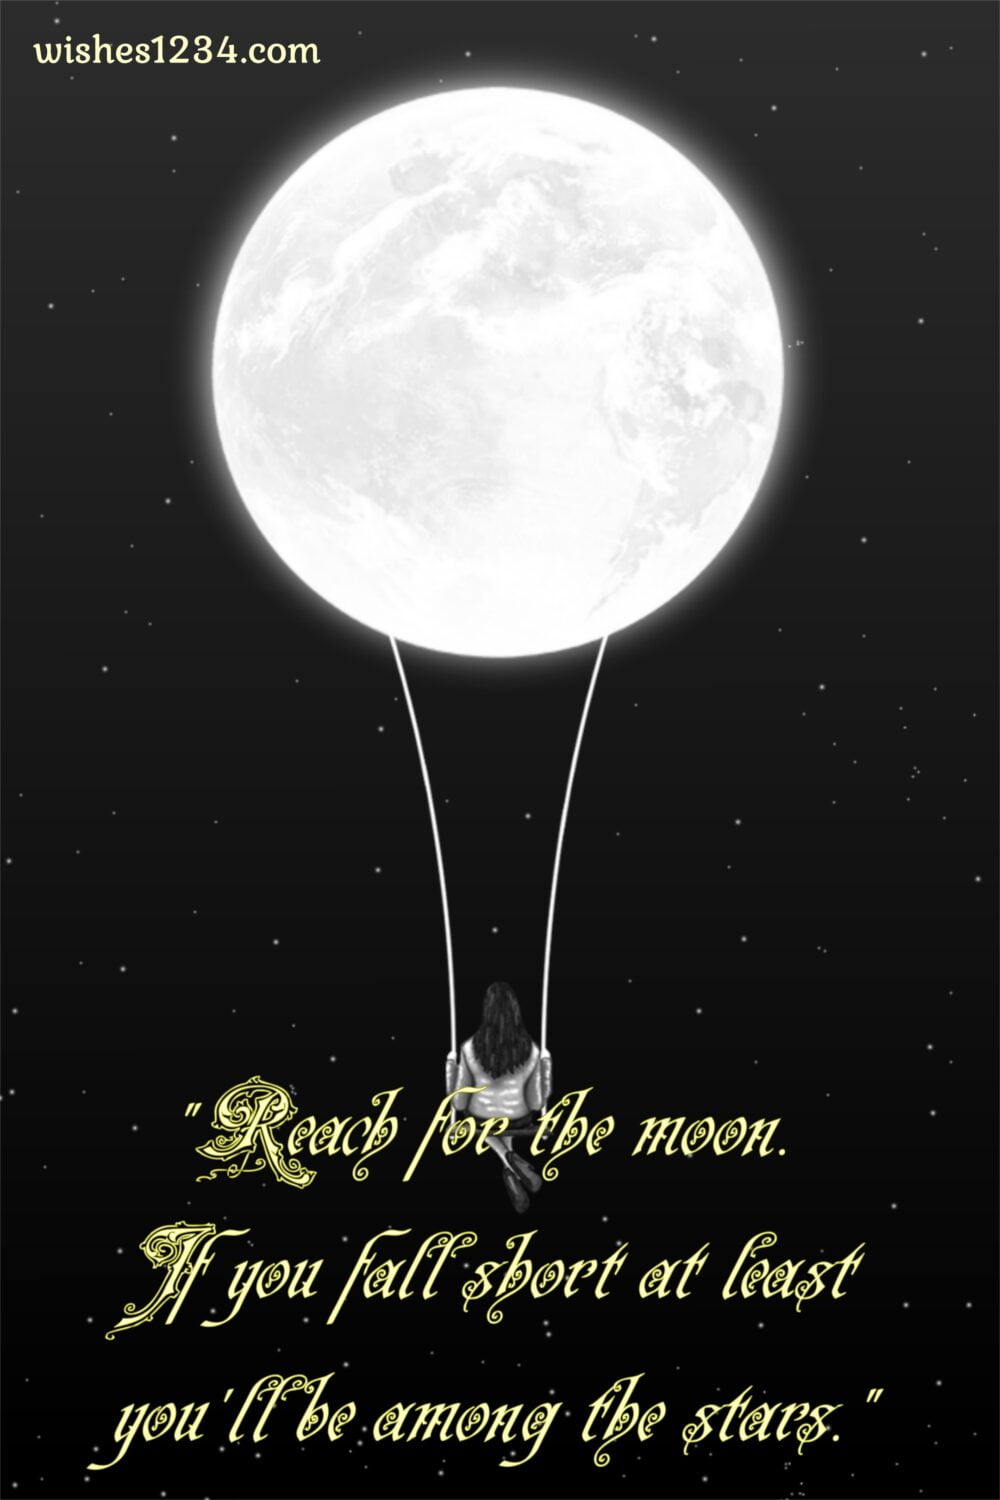 Girl swinging with moon, Super motivational quotes | Unique quotes on life.